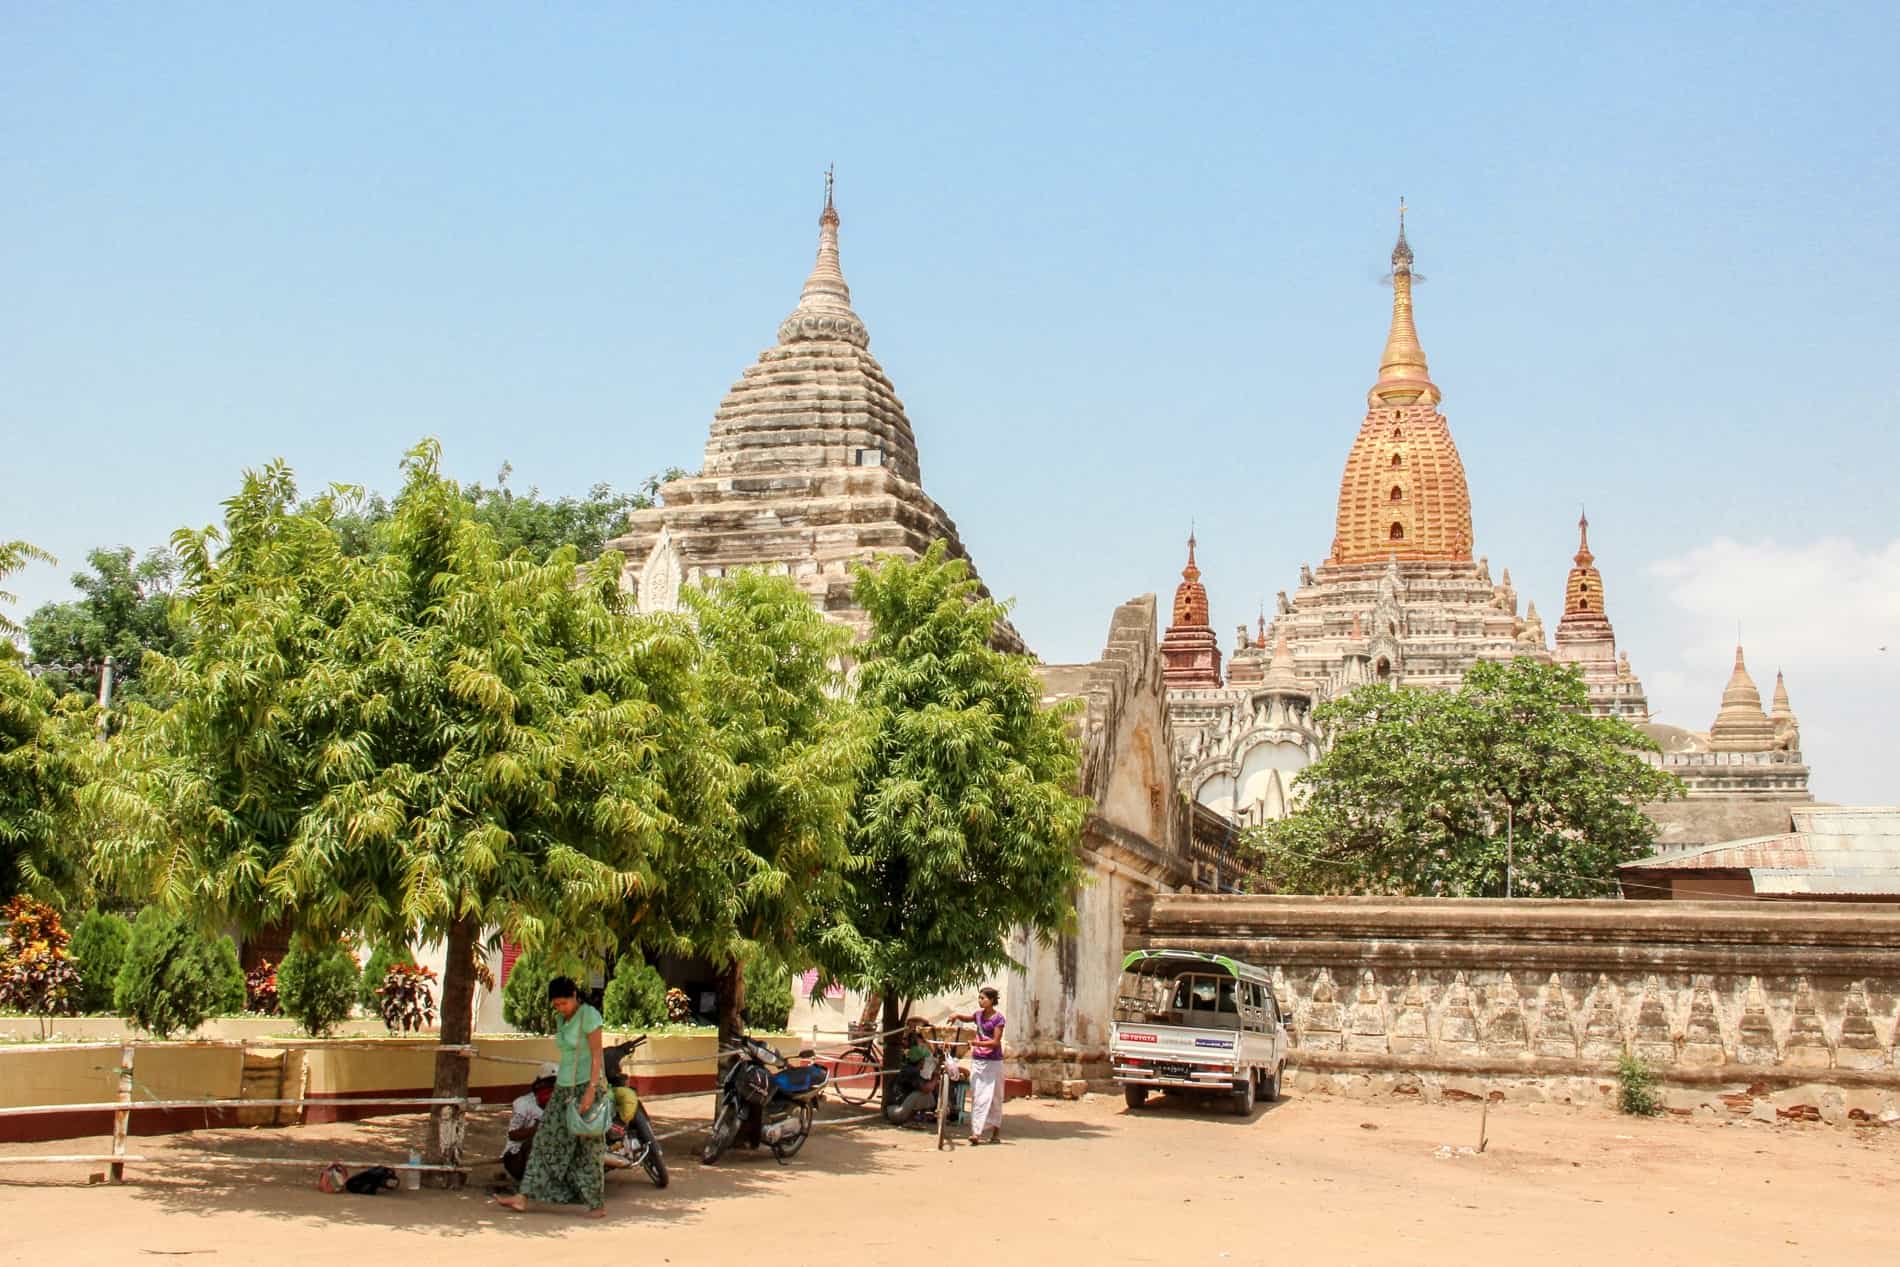 People gather under the trees at the entrance to a large temple complex with white and gold pagodas, in the dusty grounds of Bagan, Myanmar.